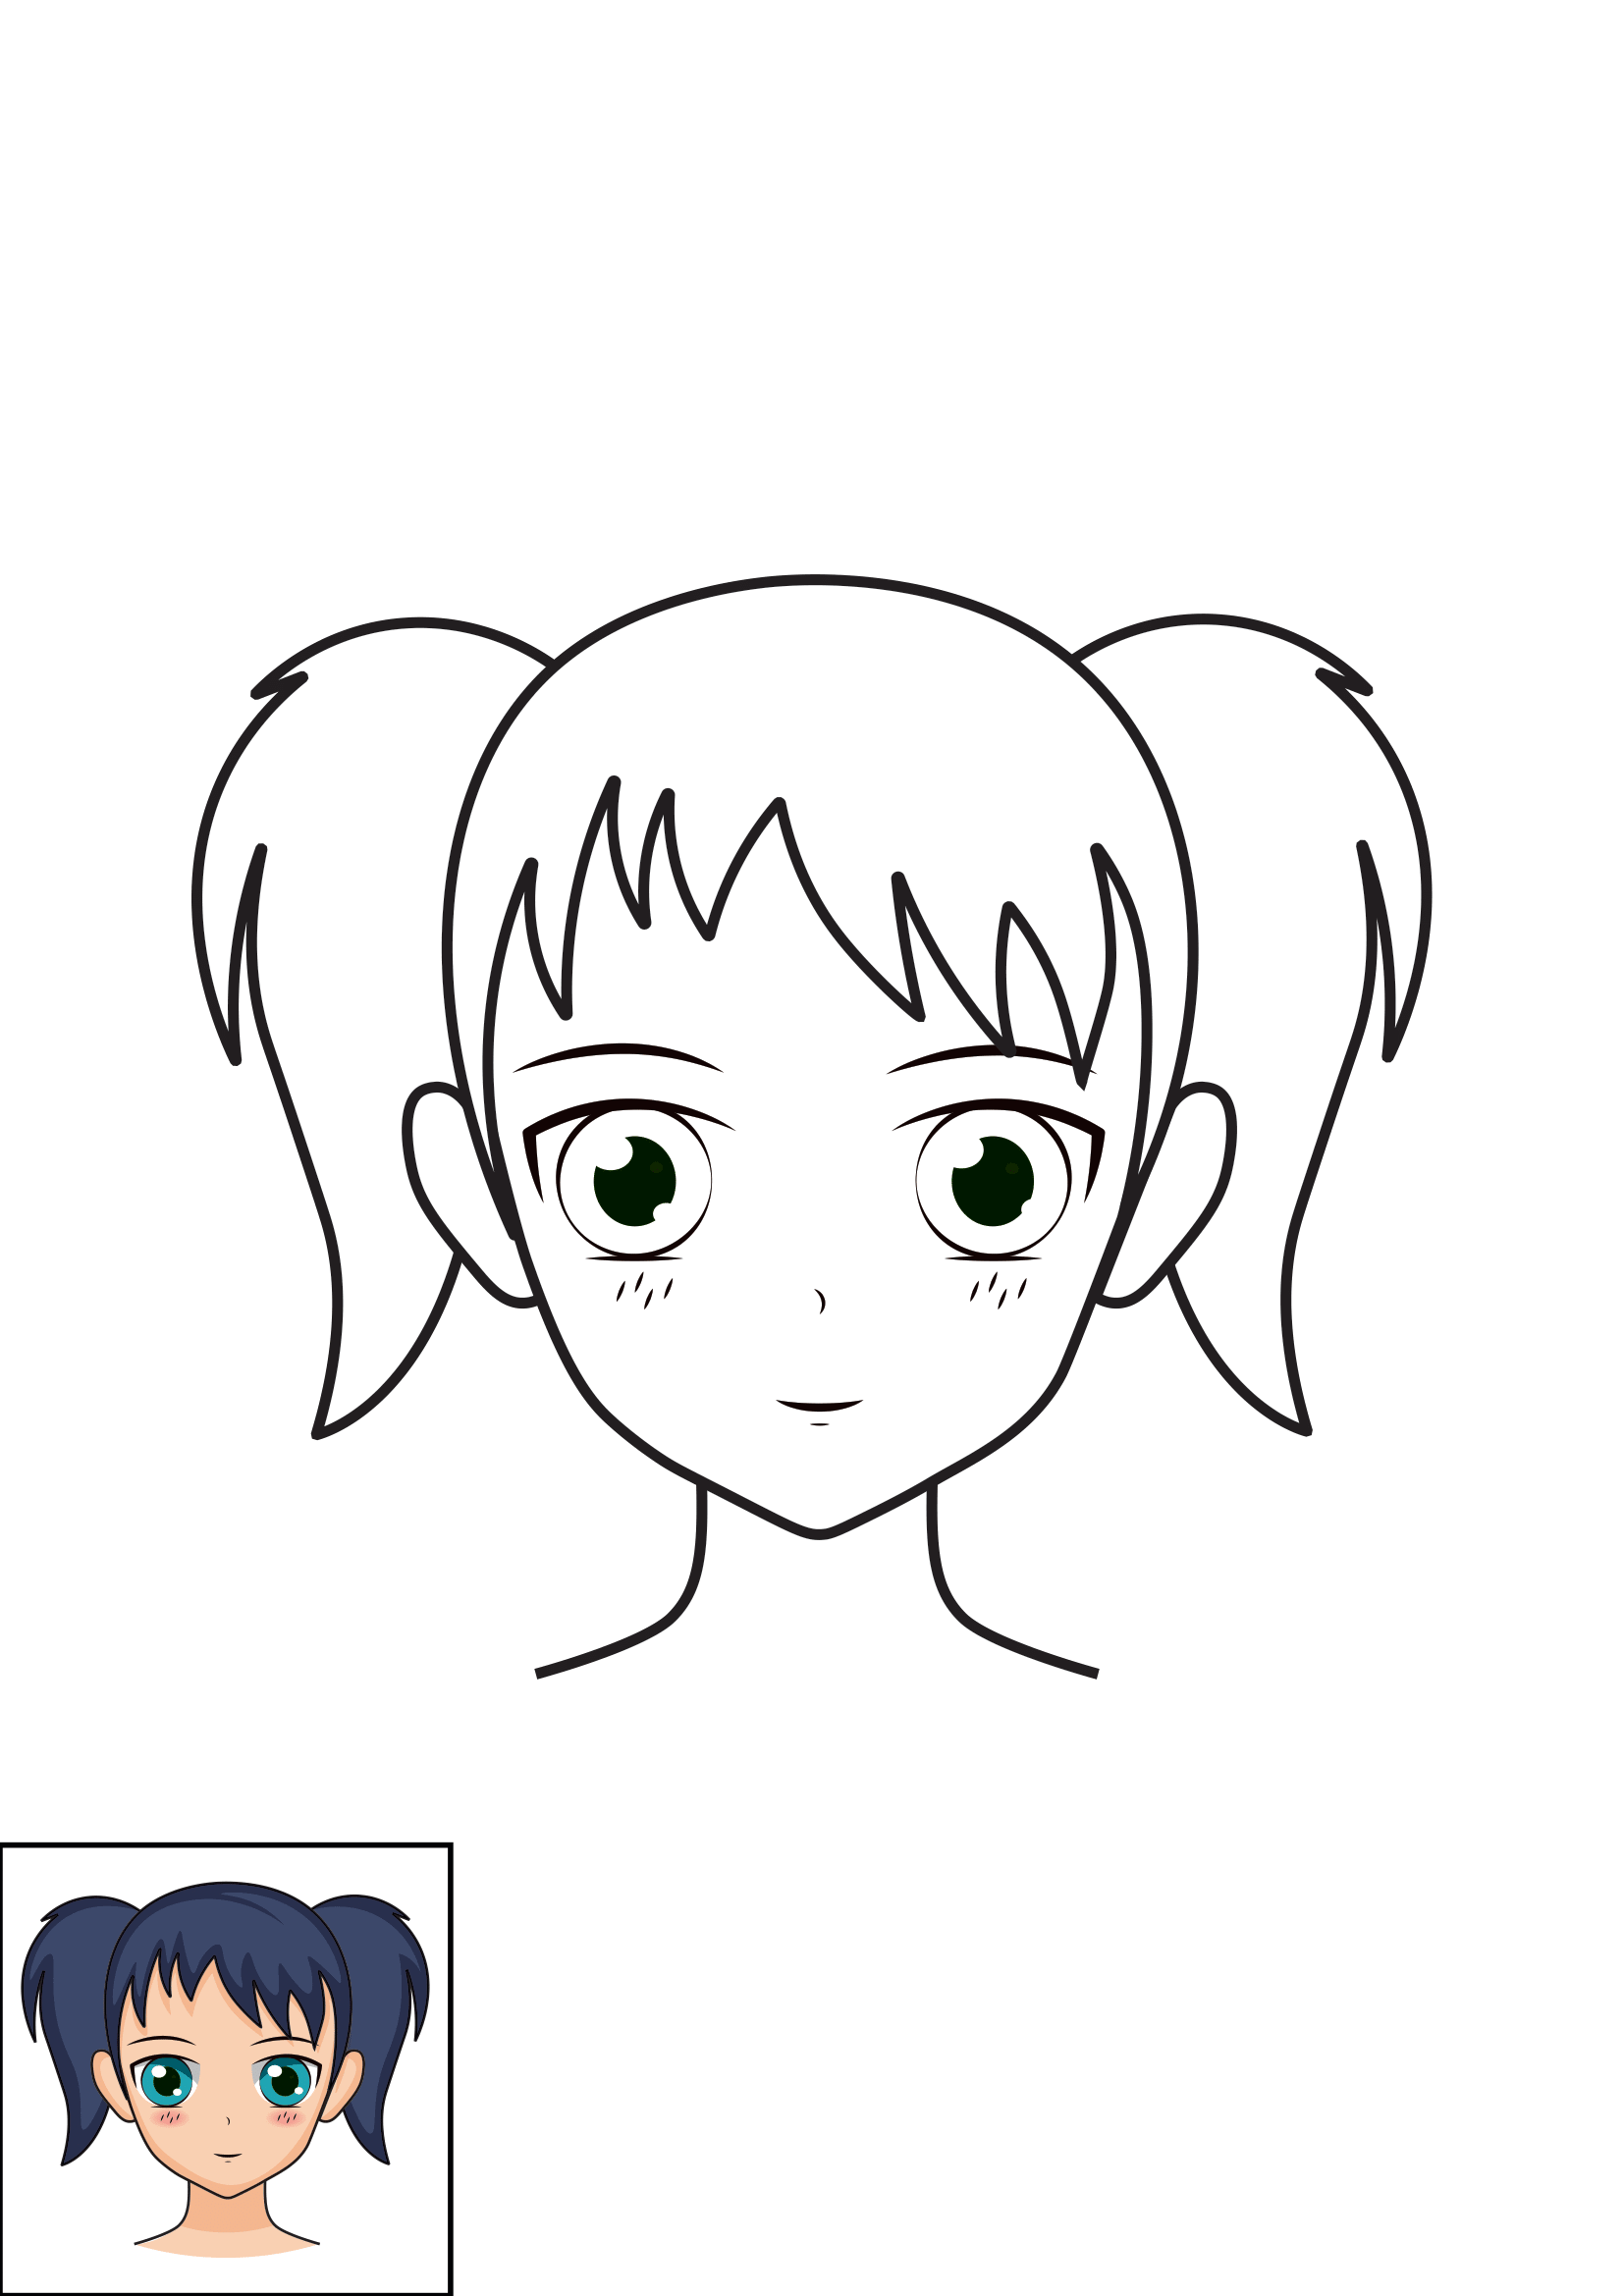 How to Draw A Female Face Step by Step Printable Color